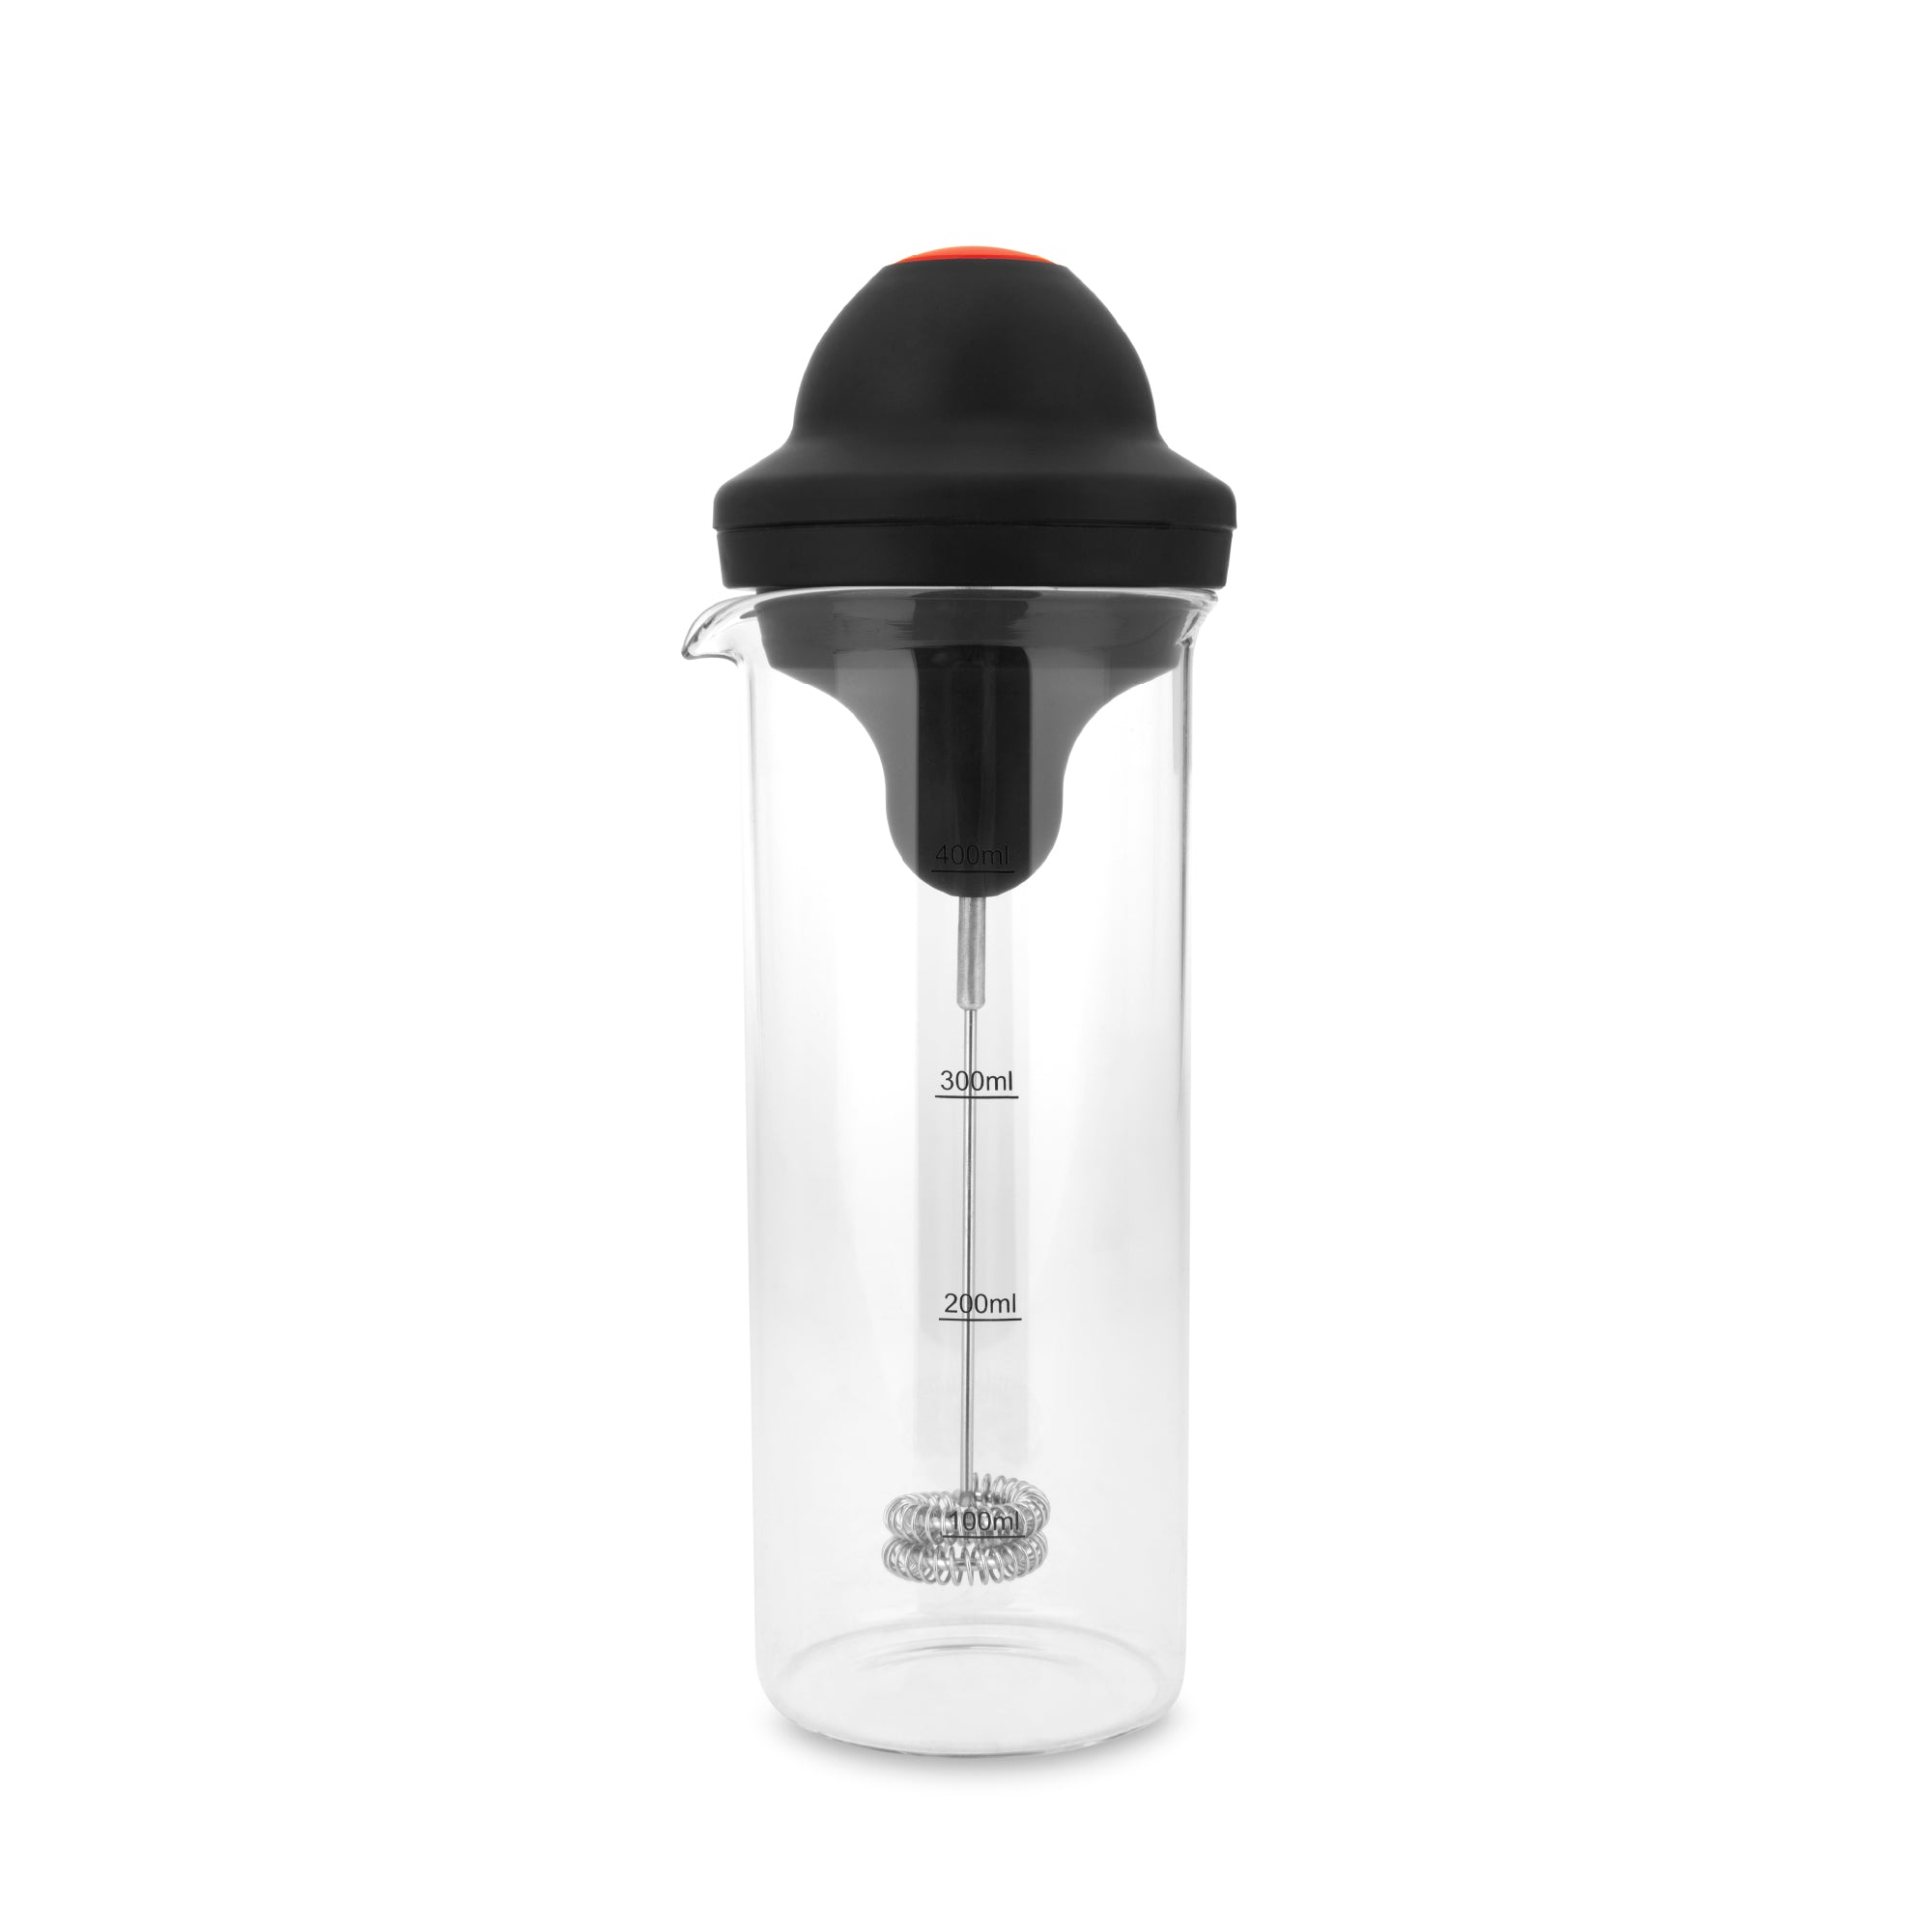 https://cdn.shopify.com/s/files/1/0293/4380/9620/products/espressoworks-battery-operated-milk-frother_2000x.jpg?v=1604990801